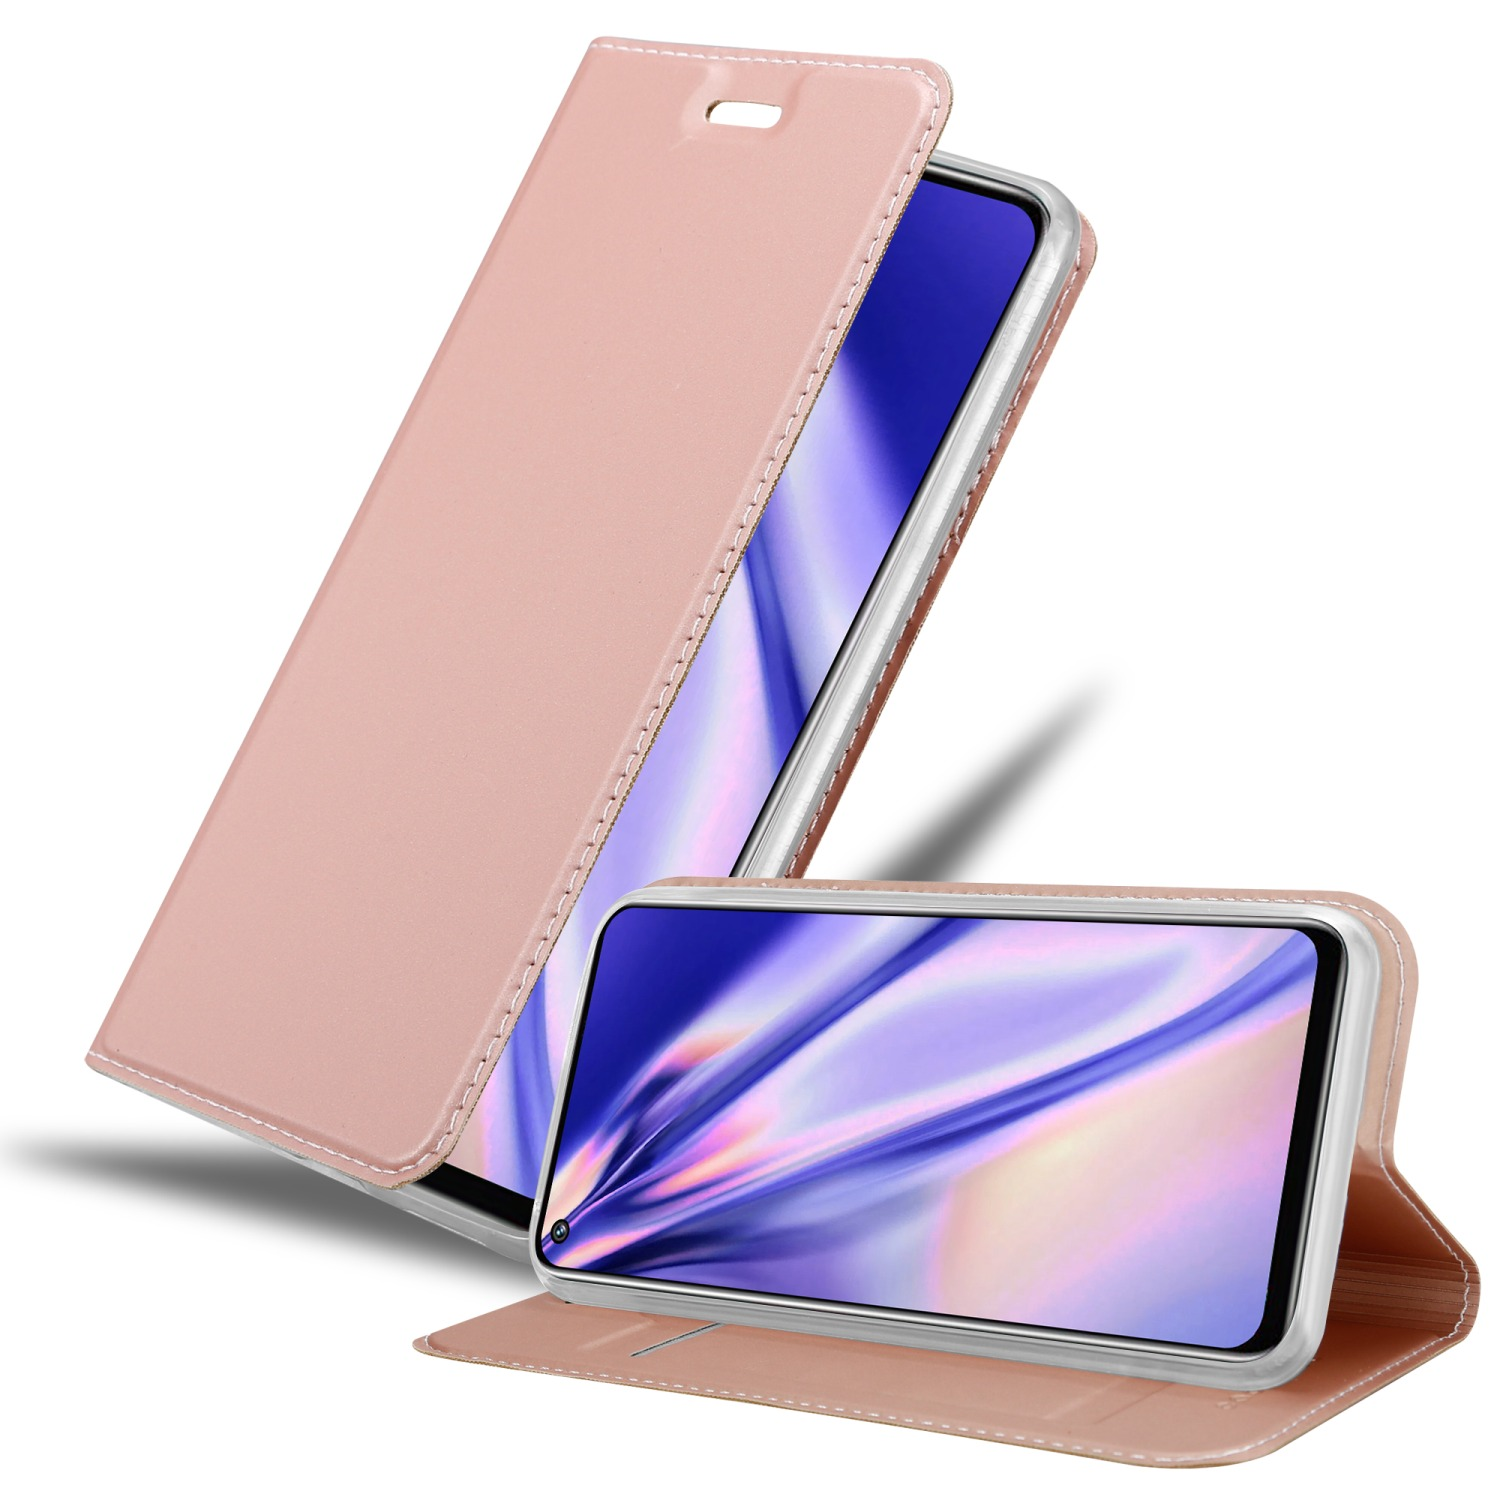 Bookcover, PRO Book / 5G Realme, Style, 5G, ROSÉ 9 / 2 Classy CLASSY CADORABO GOLD CE 9 Q5 Nord V25 LITE Handyhülle OnePlus / /